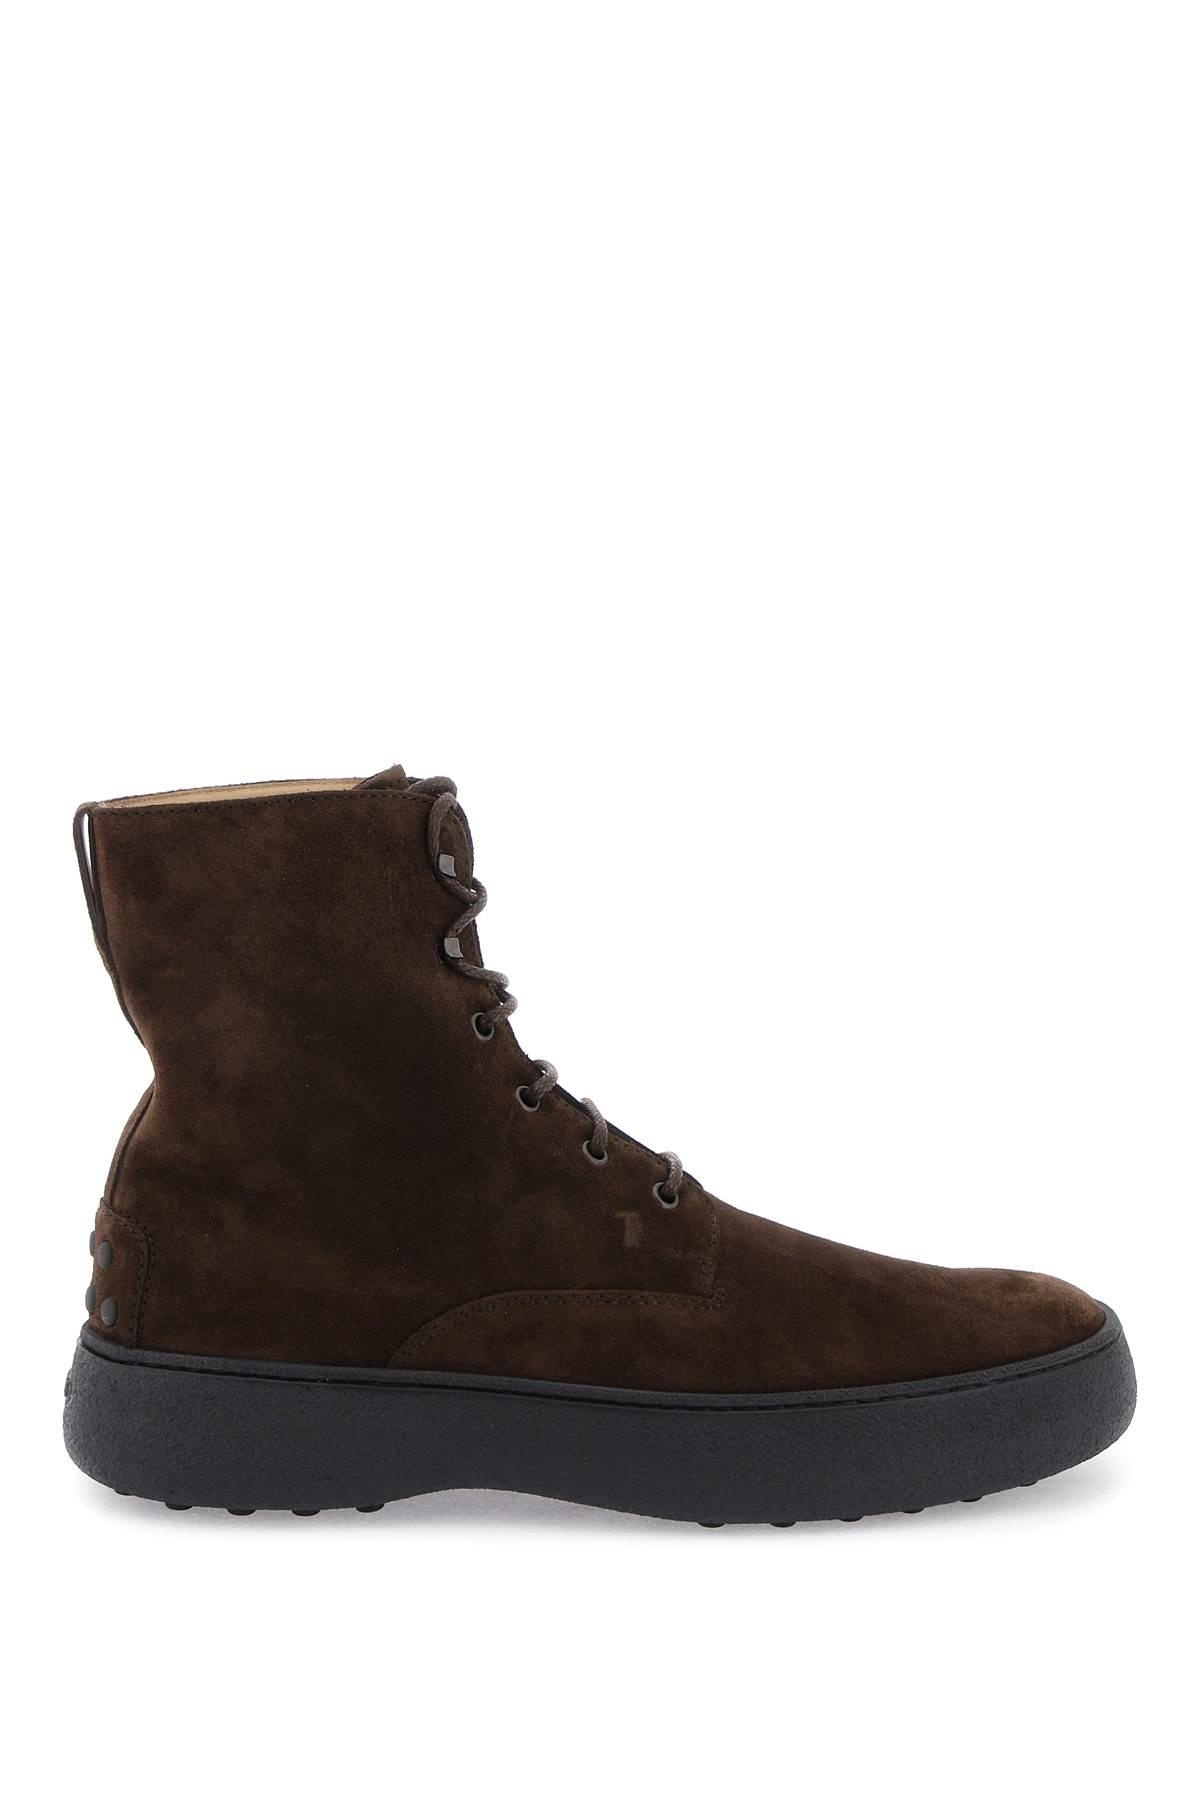 W.G. SUEDE LACE-UP ANKLE BOOTS - 1